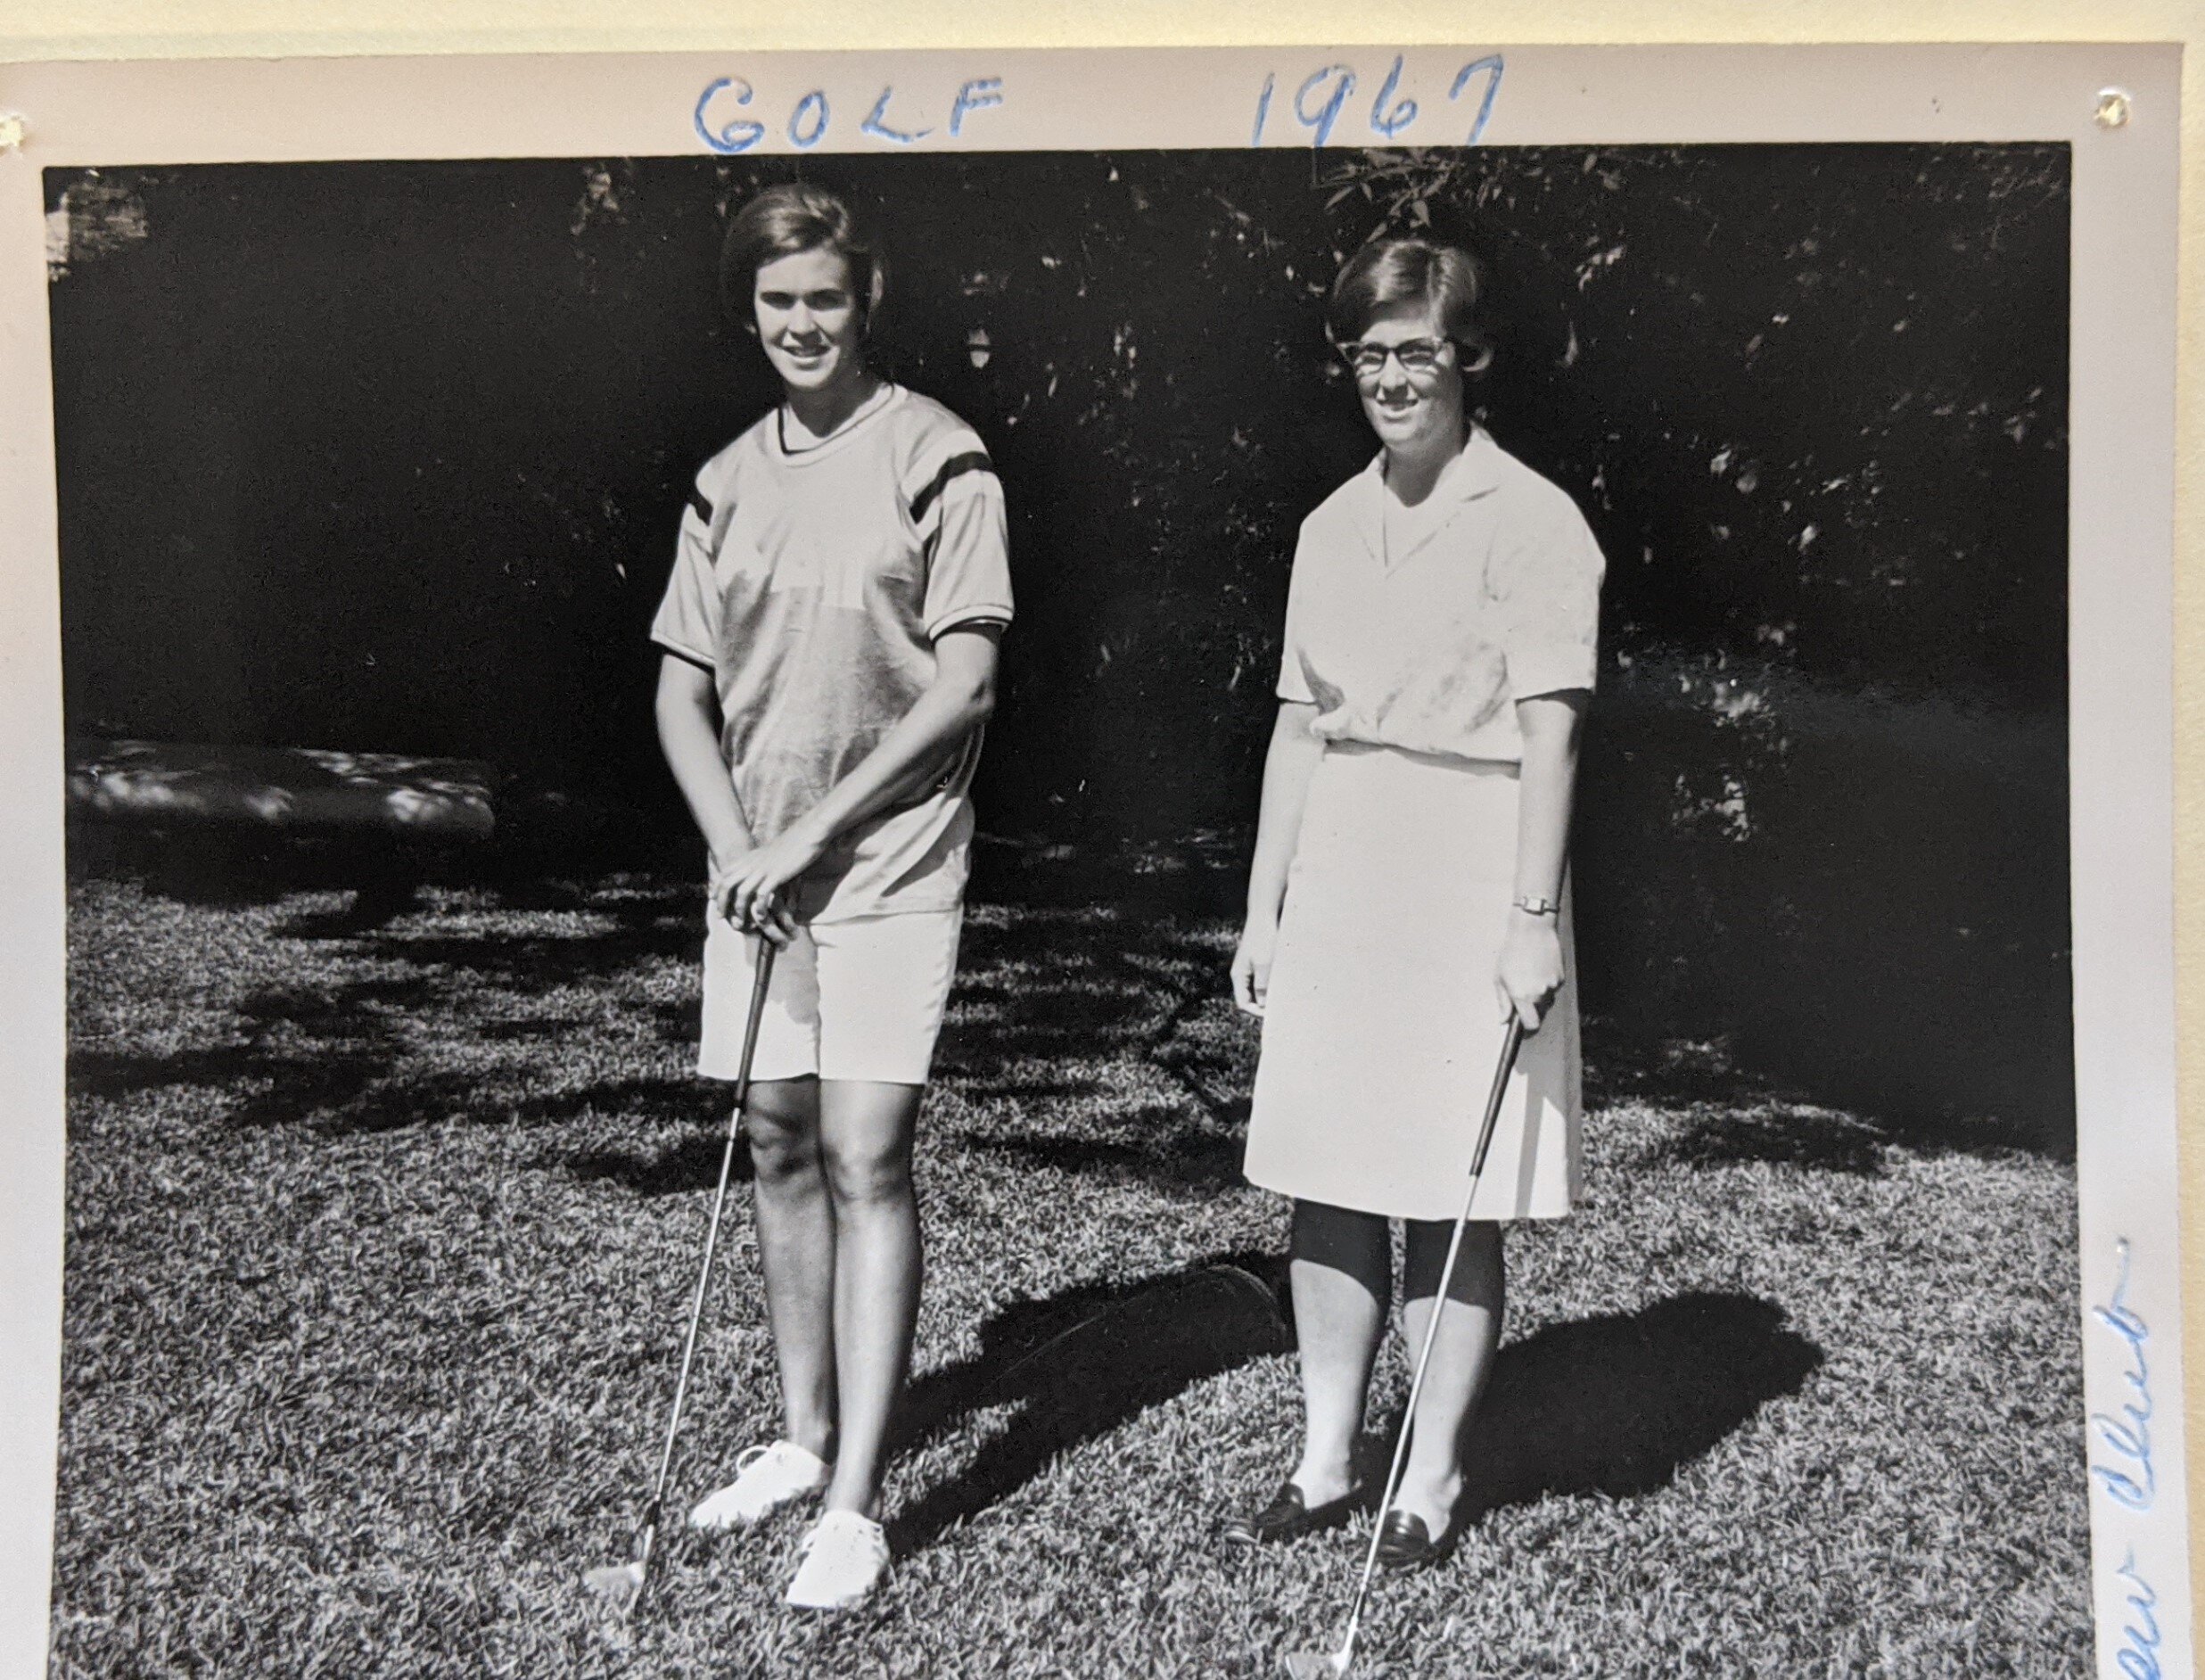  Golf Champs- Betty Ferguson and Barbdver Beck 